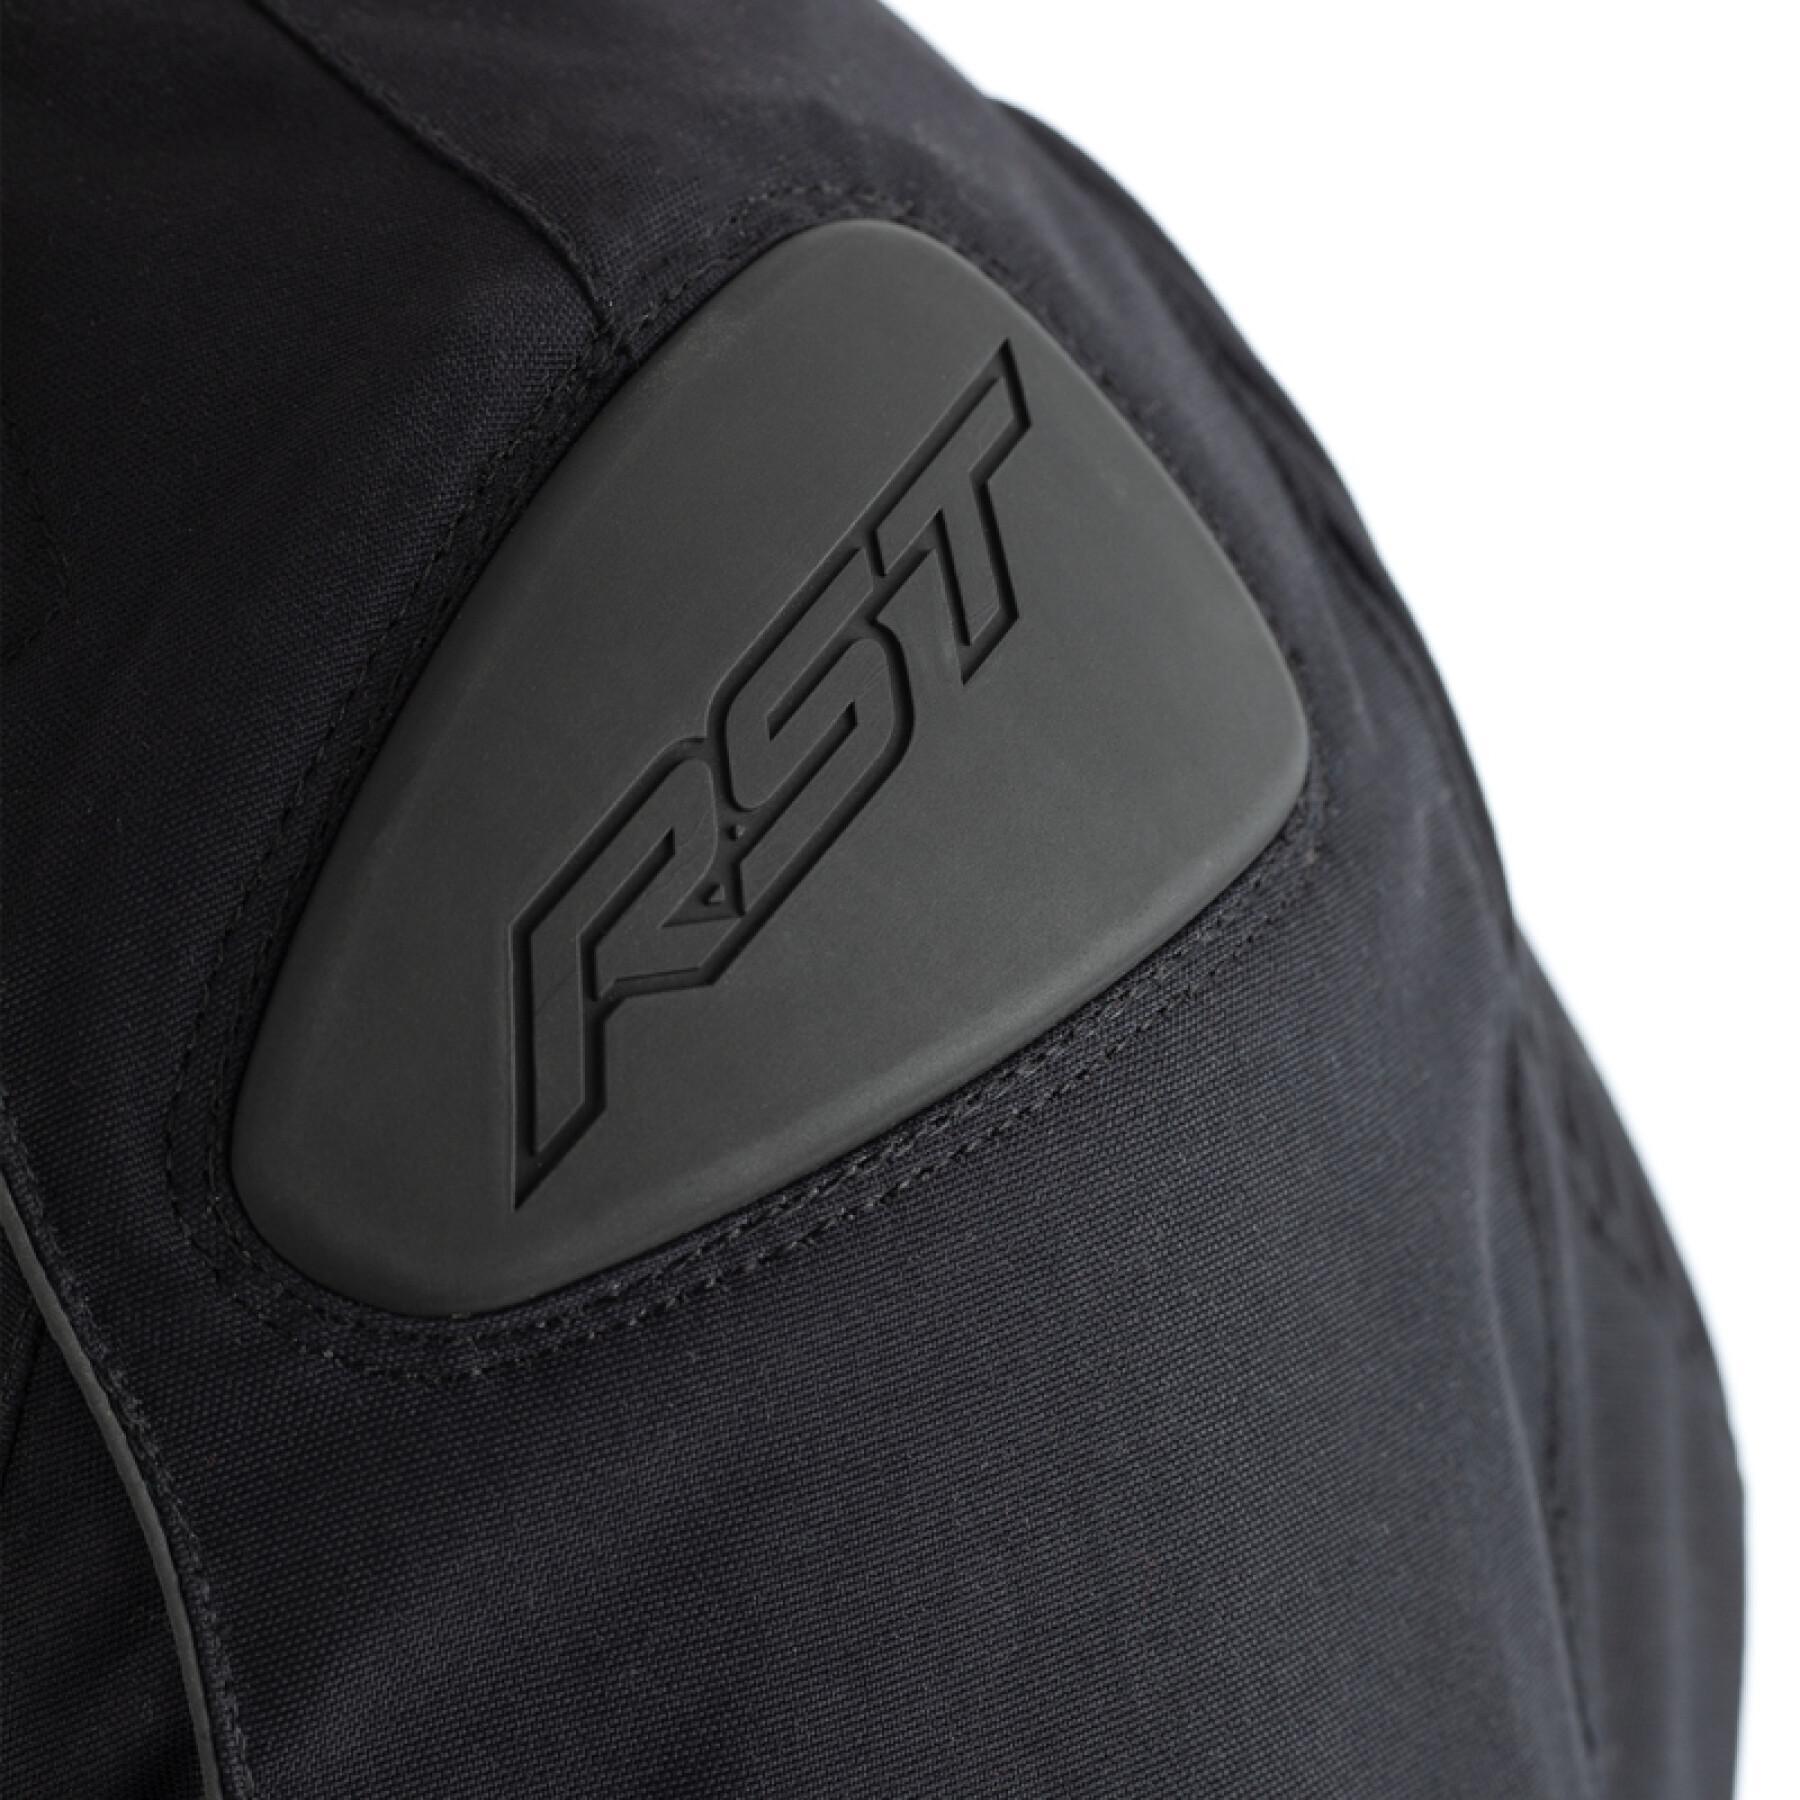 Motorcycle jacket RST GT Airbag CE